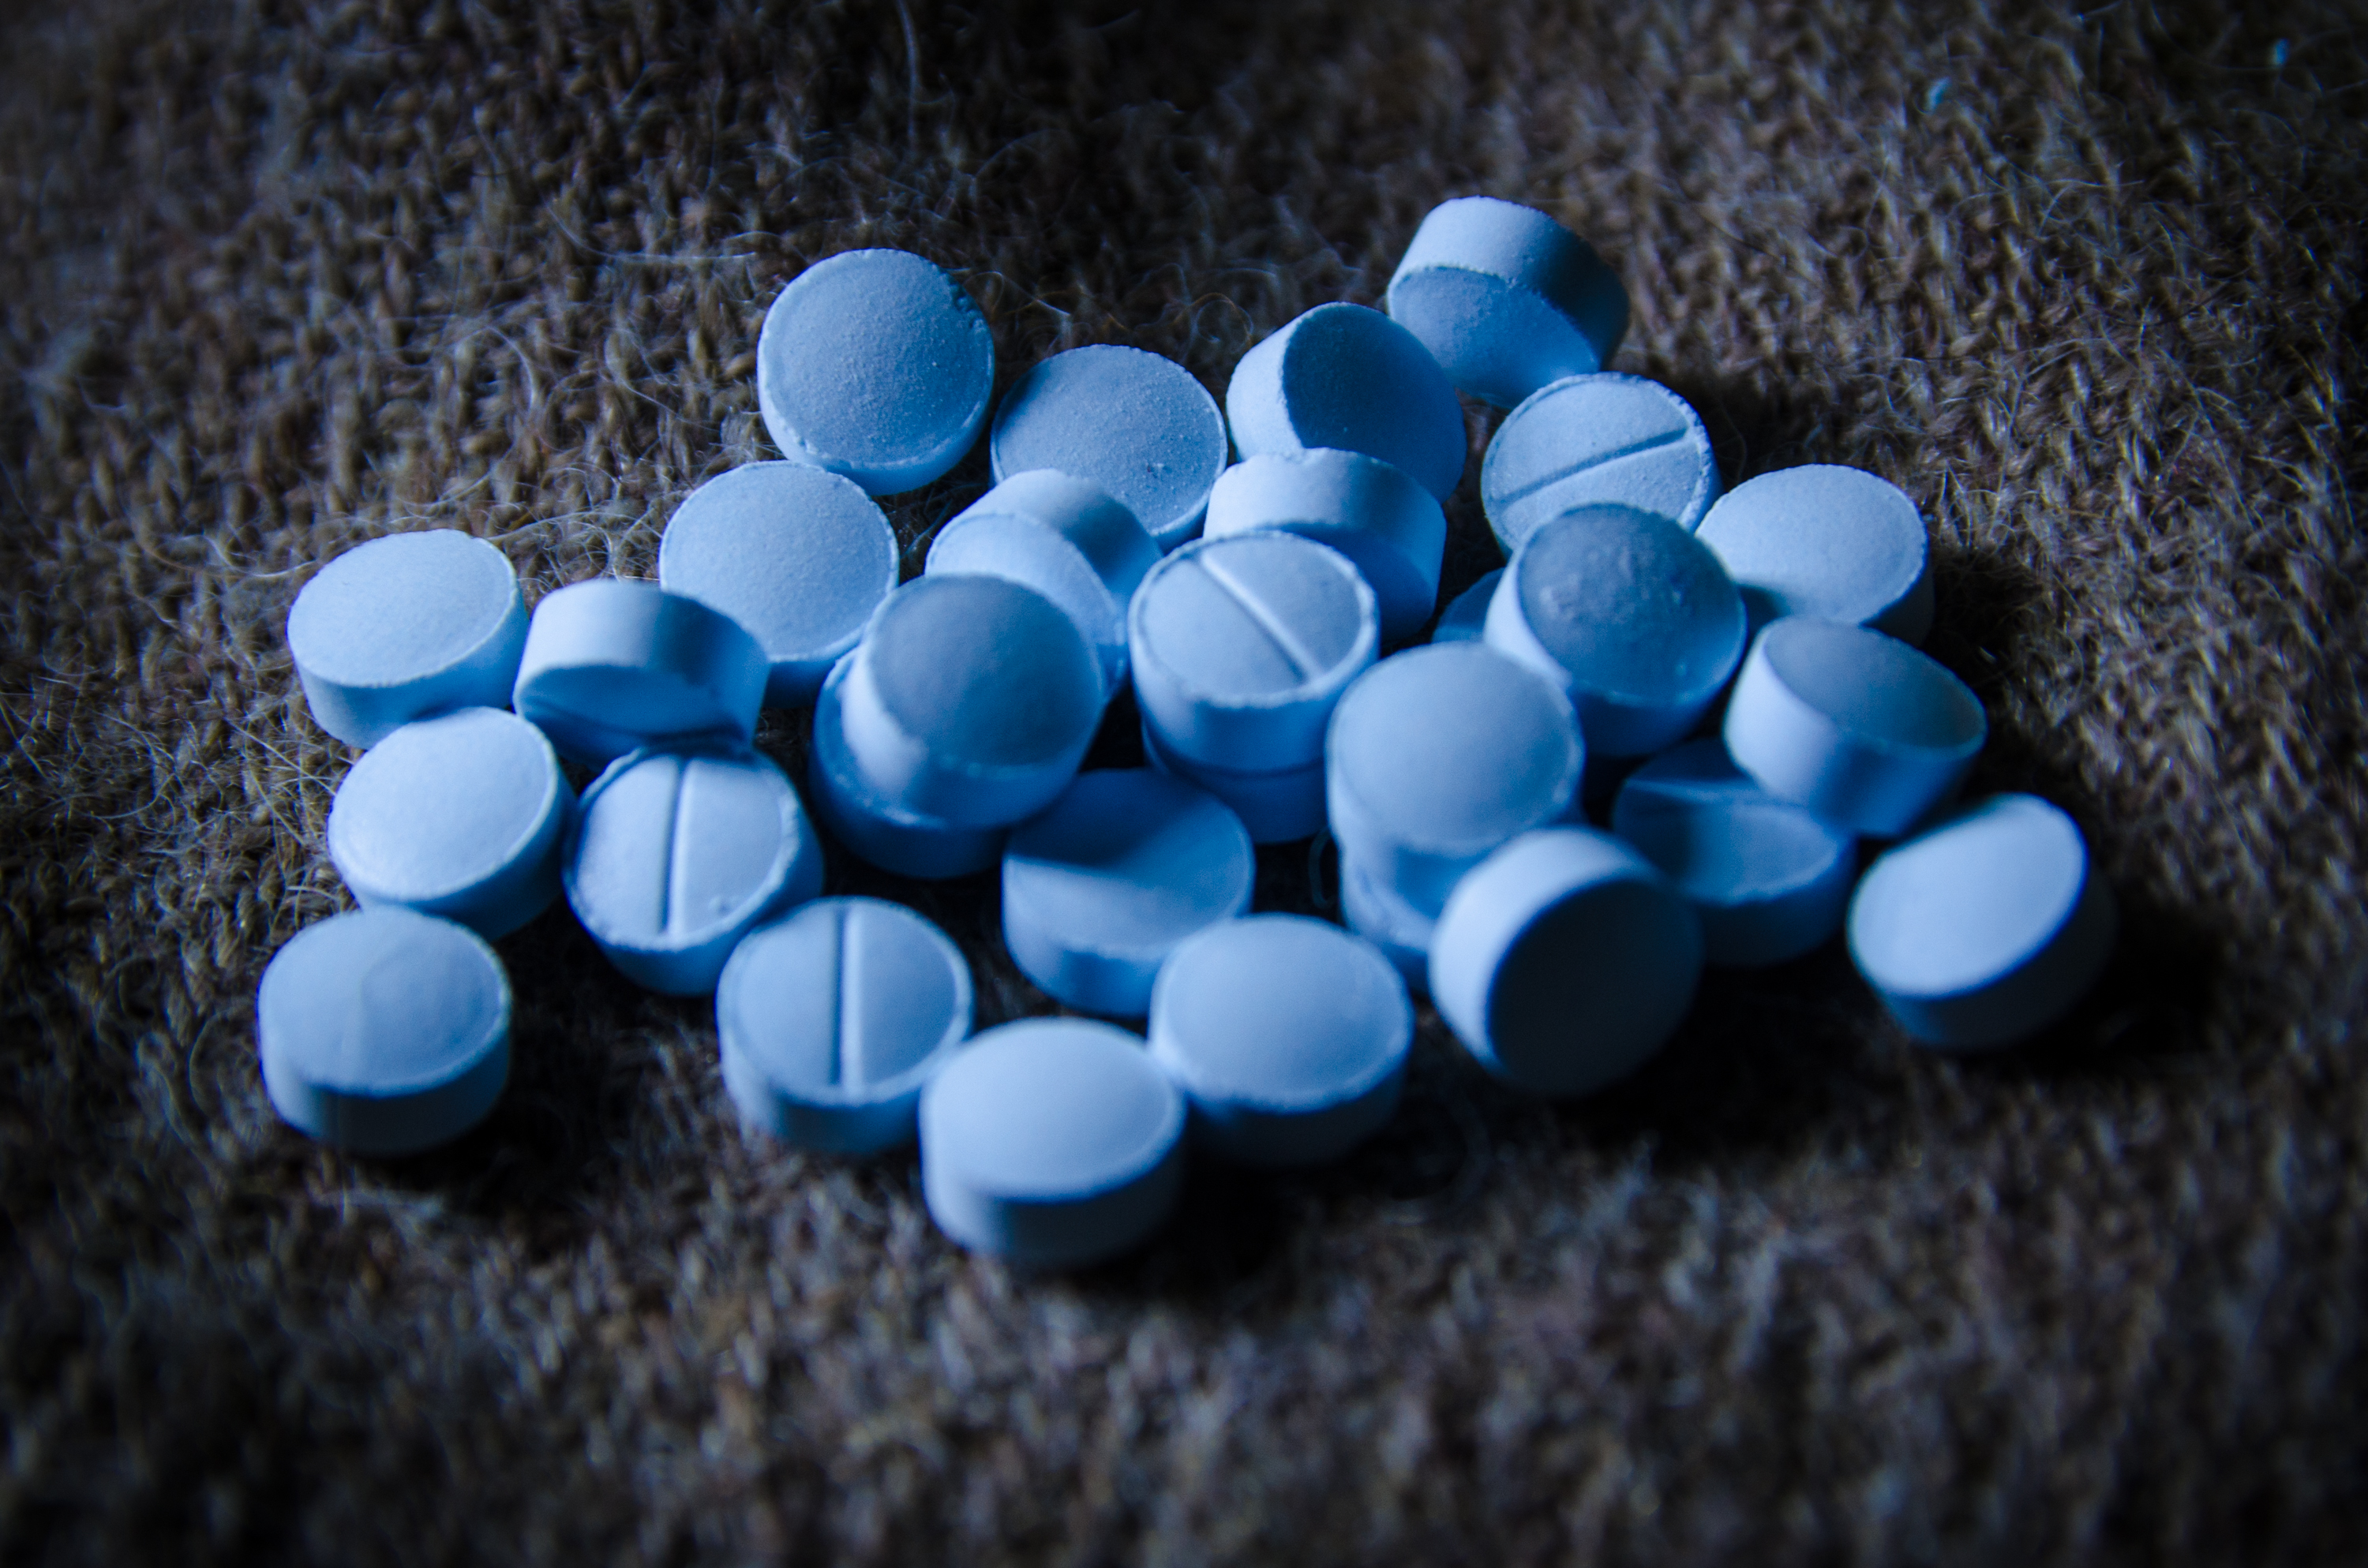 Street valium is a factor in many drug-related deaths.